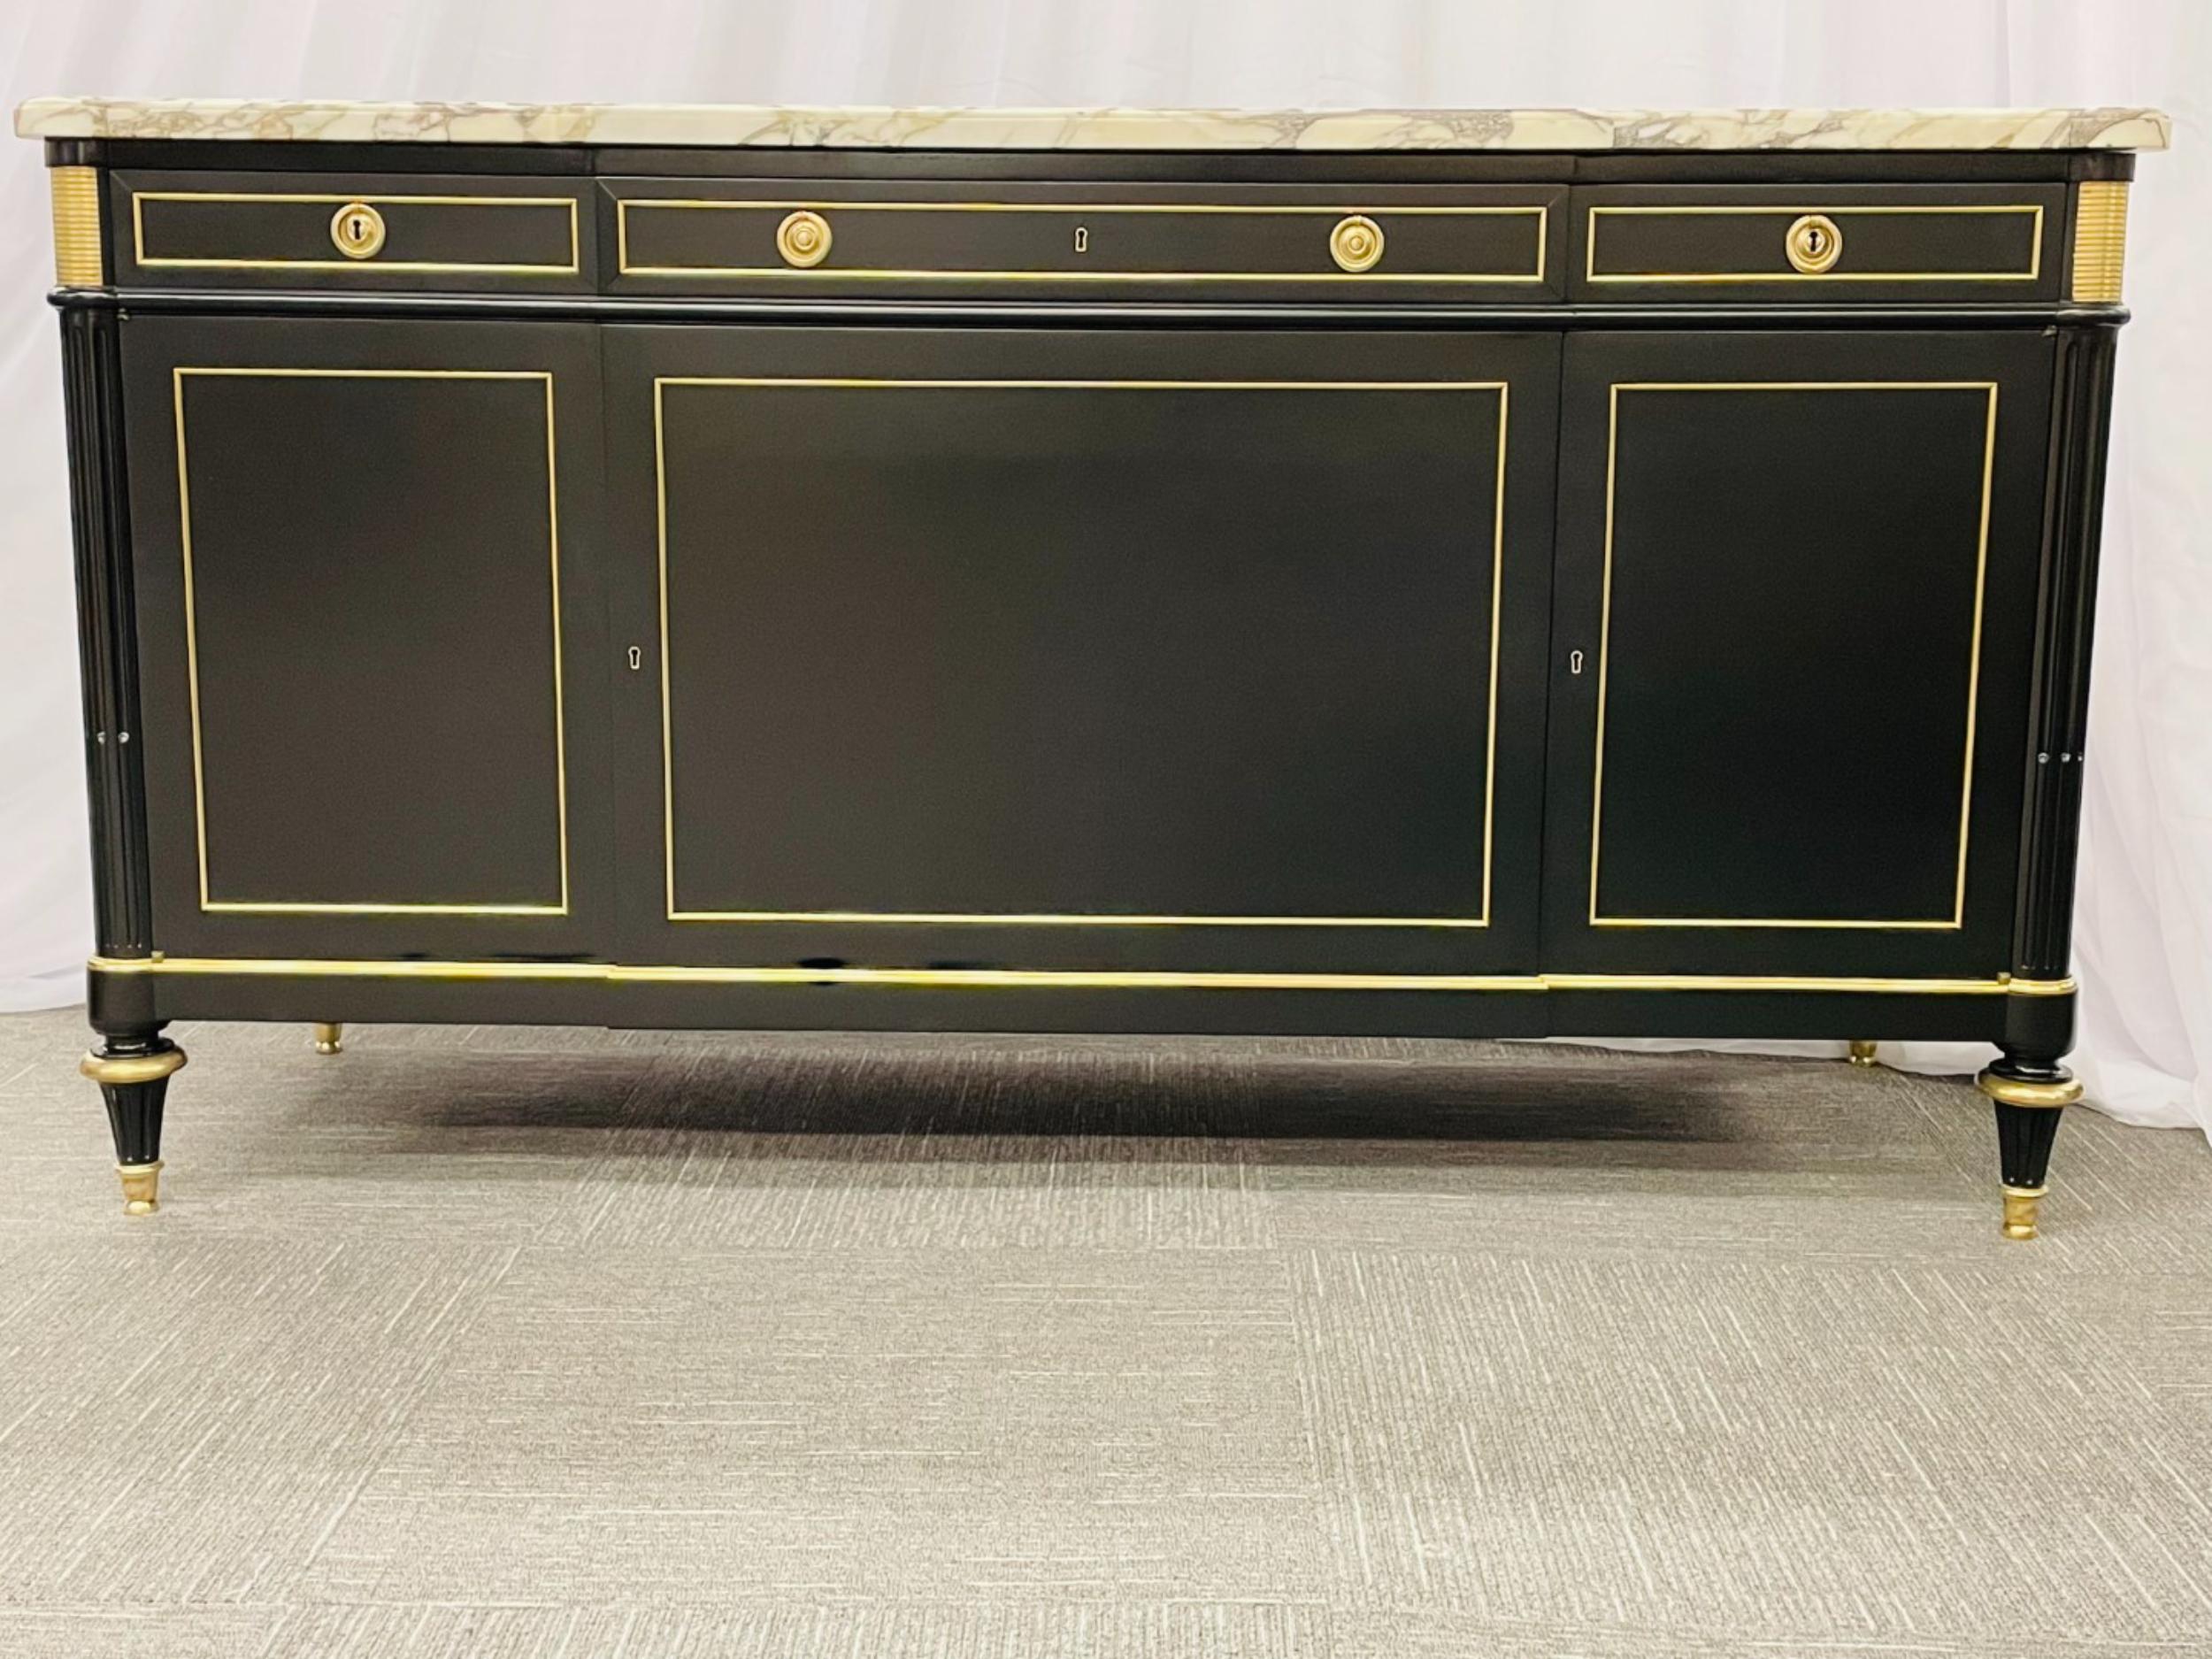 A Louis XVI Maison Jansen Style sideboard or cabinet having an ebony finish with bronze mounts throughout supporting a thick white and gray veined Carrera marble top. This one of a kind wide and fine quality cabinet sports separate key locks for